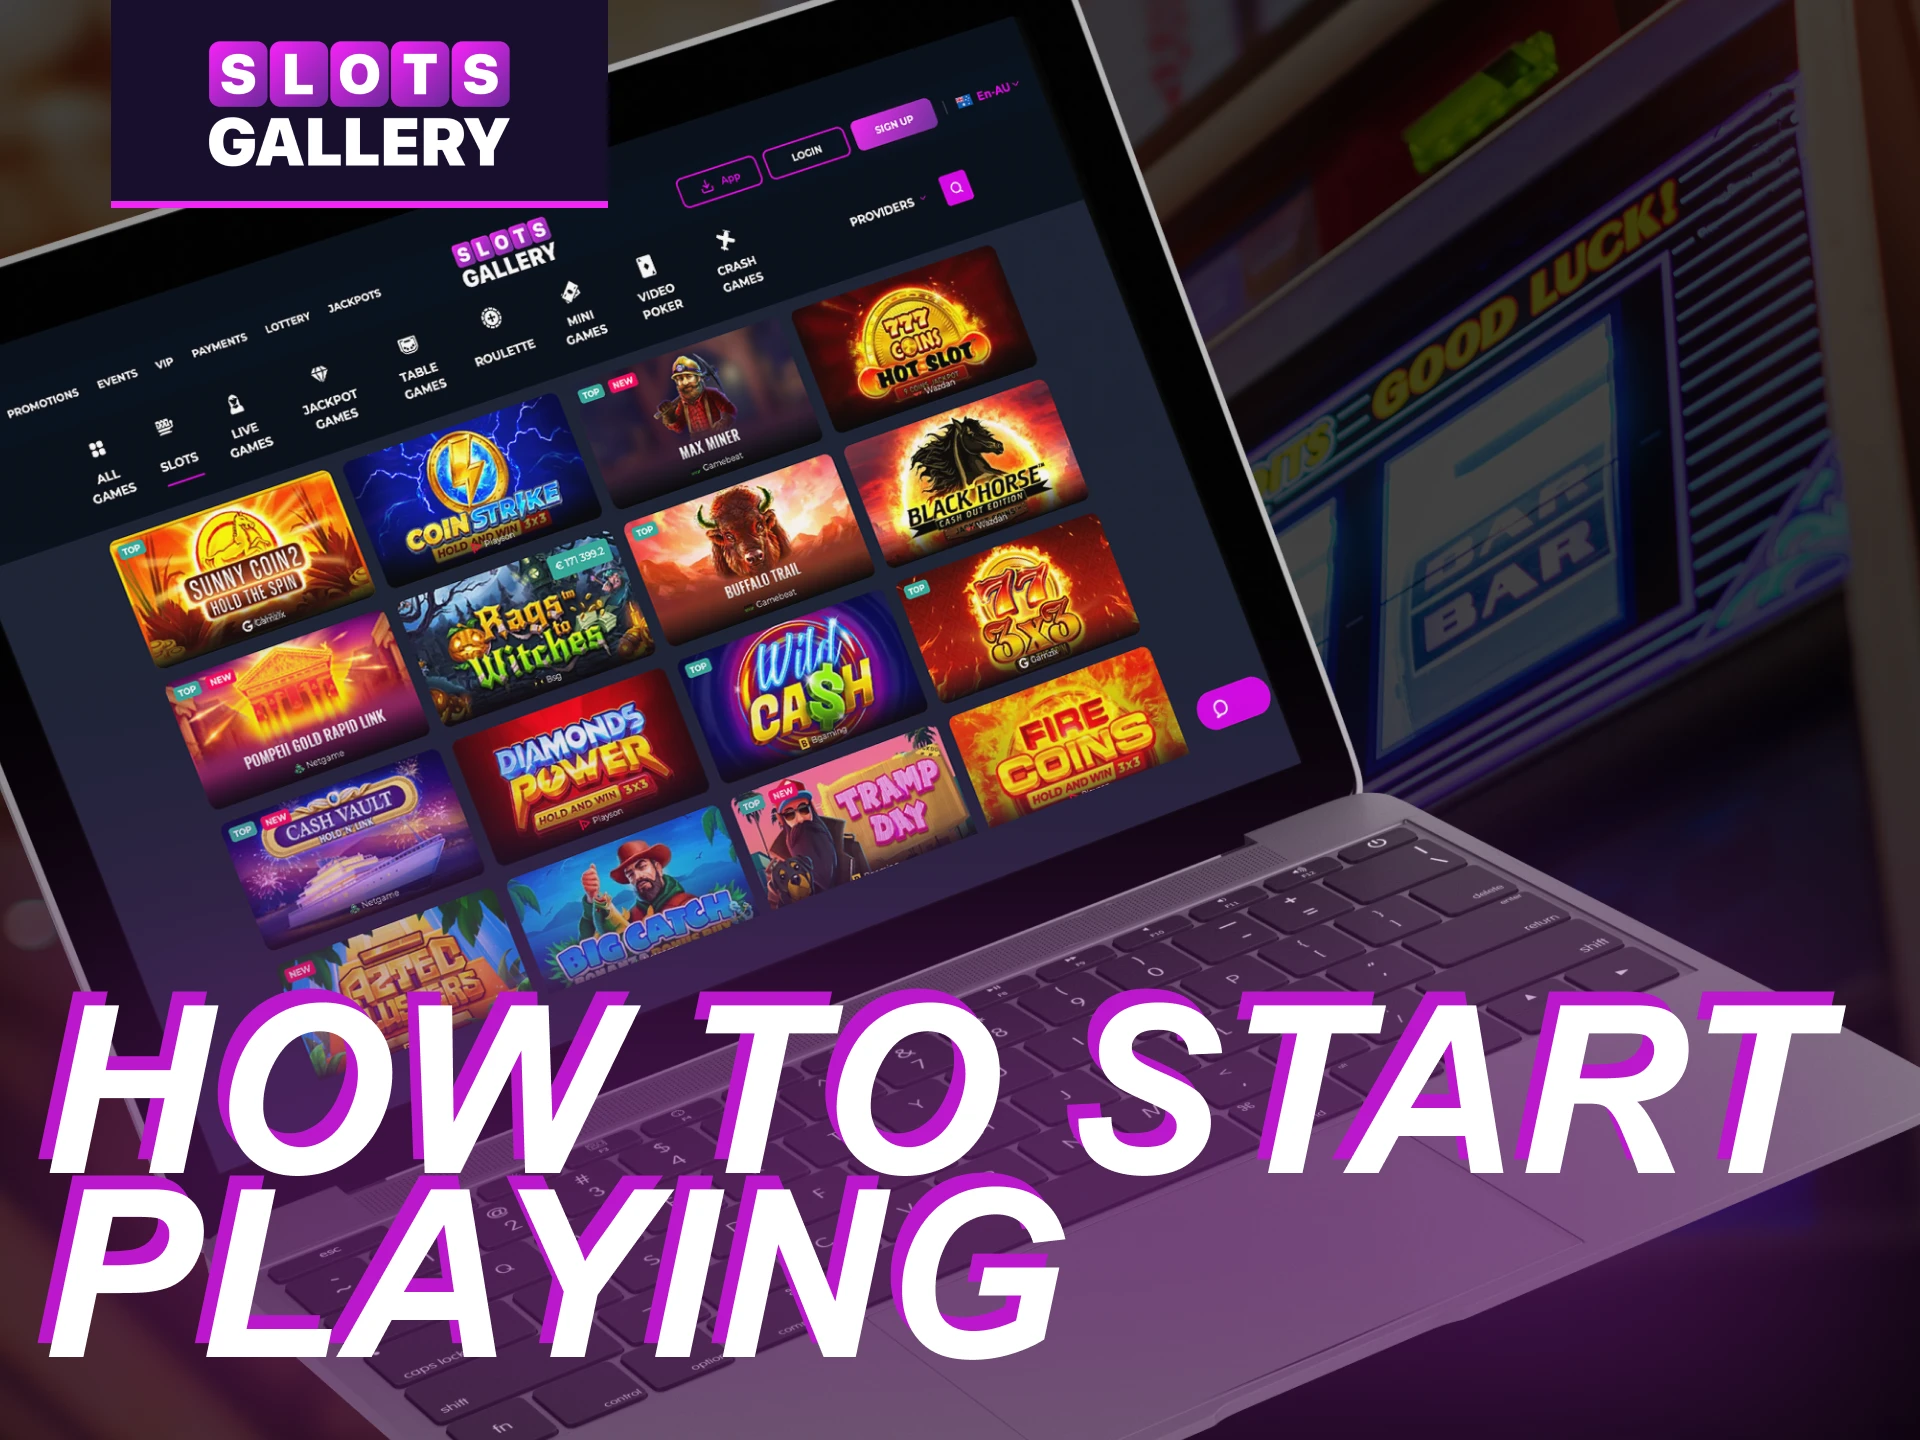 Do I need to register to play slot games at the Slots Gallery online casino.